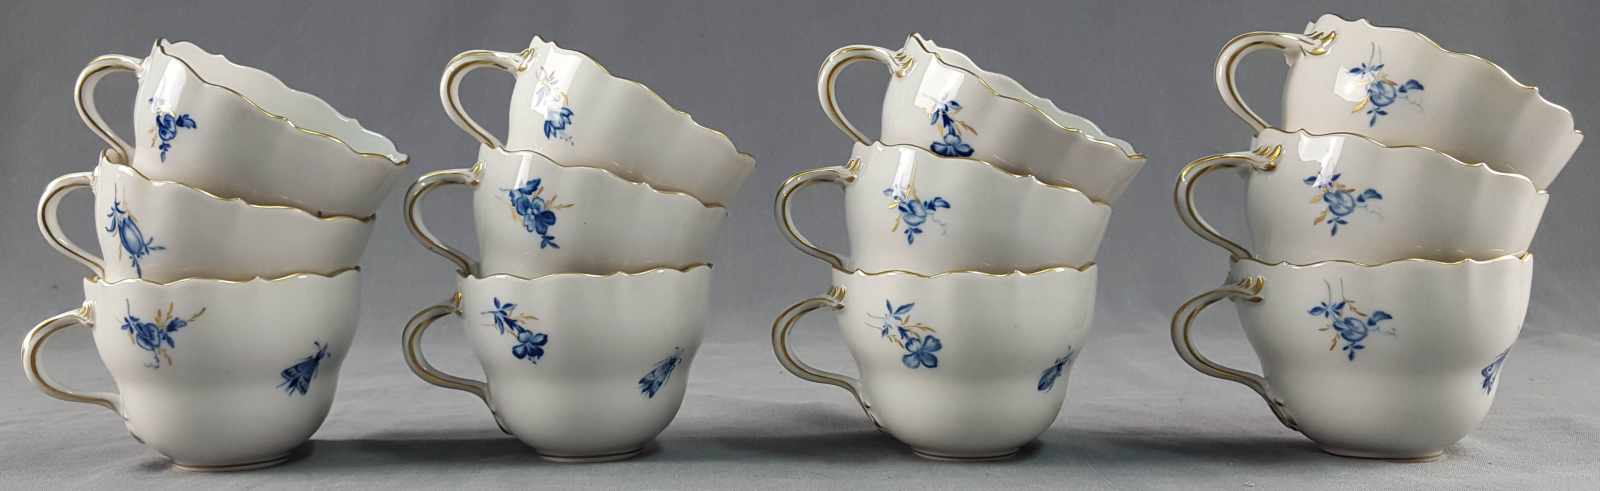 Coffee service Meissen porcelain for 12 persons. No coffee pot. - Image 6 of 19